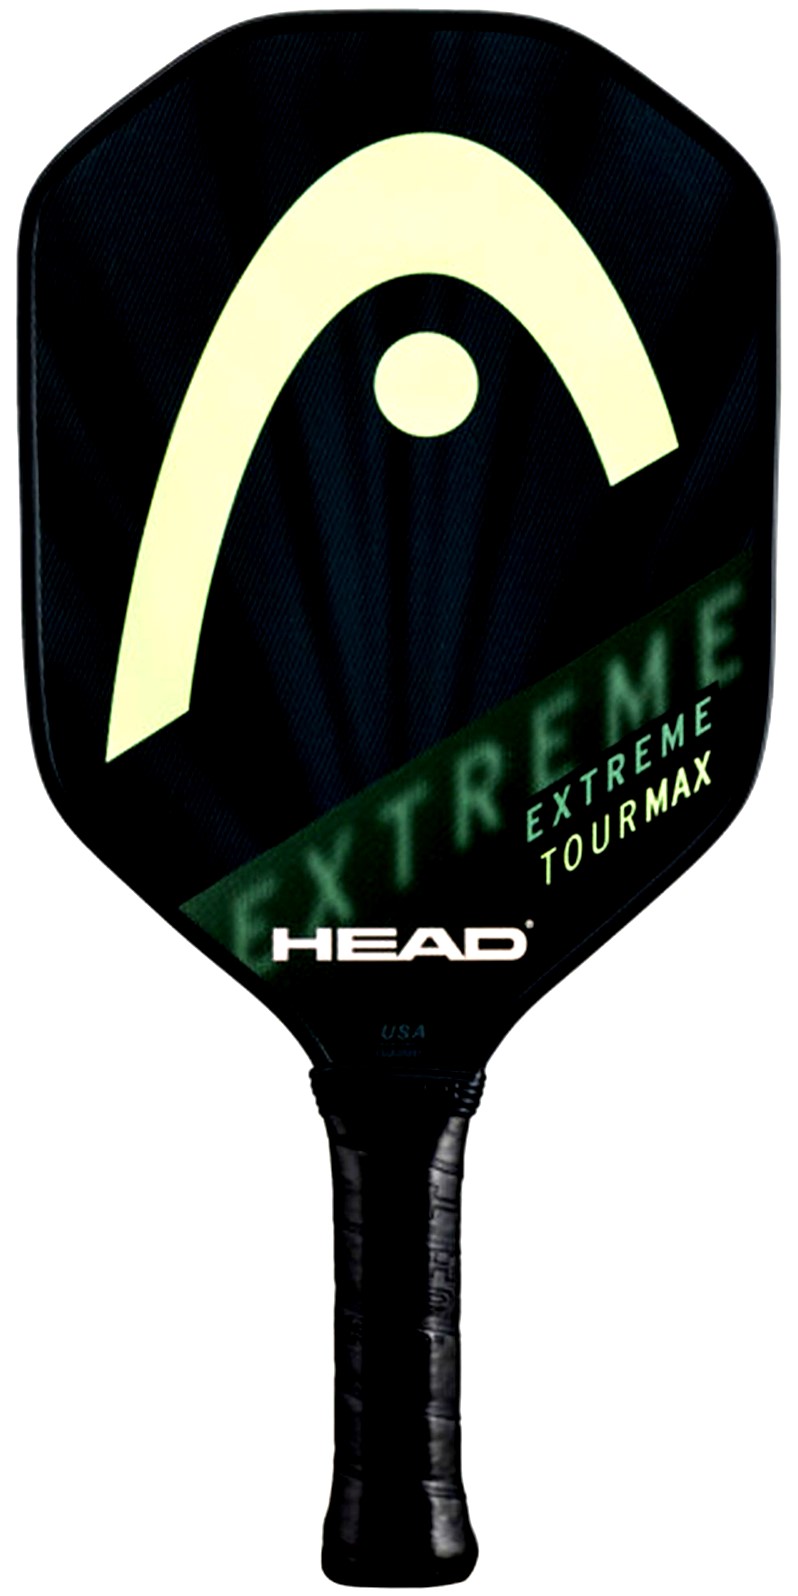 Head Pickleball Paddles, Bags and Accessories at